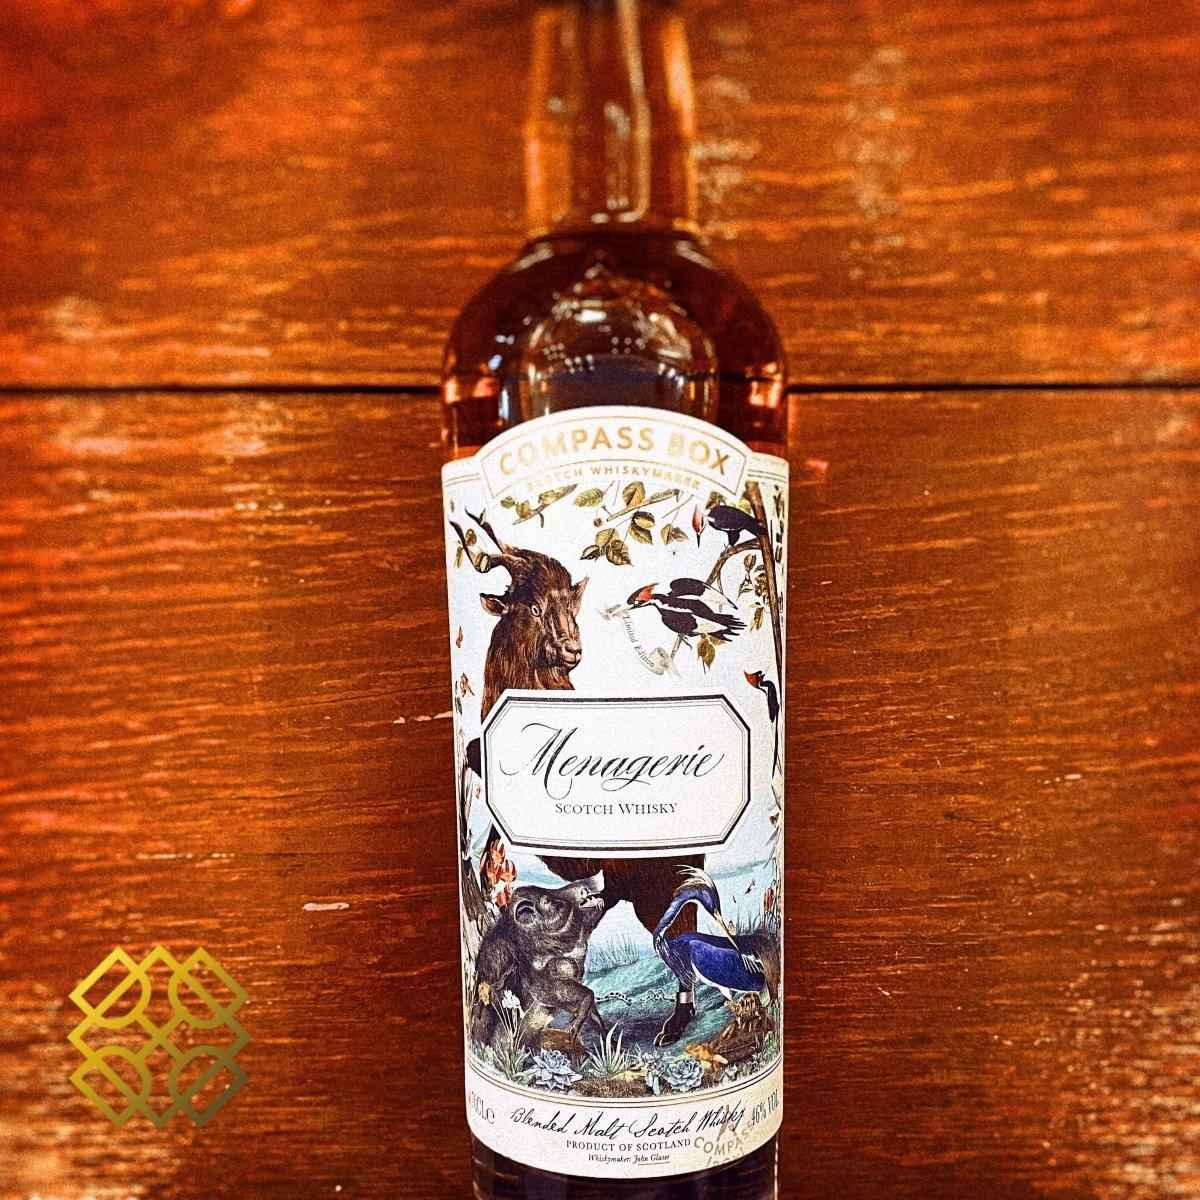 Compass Box - Menagerie, 46% (WB 88.29) , whisky, 威士忌, compass box